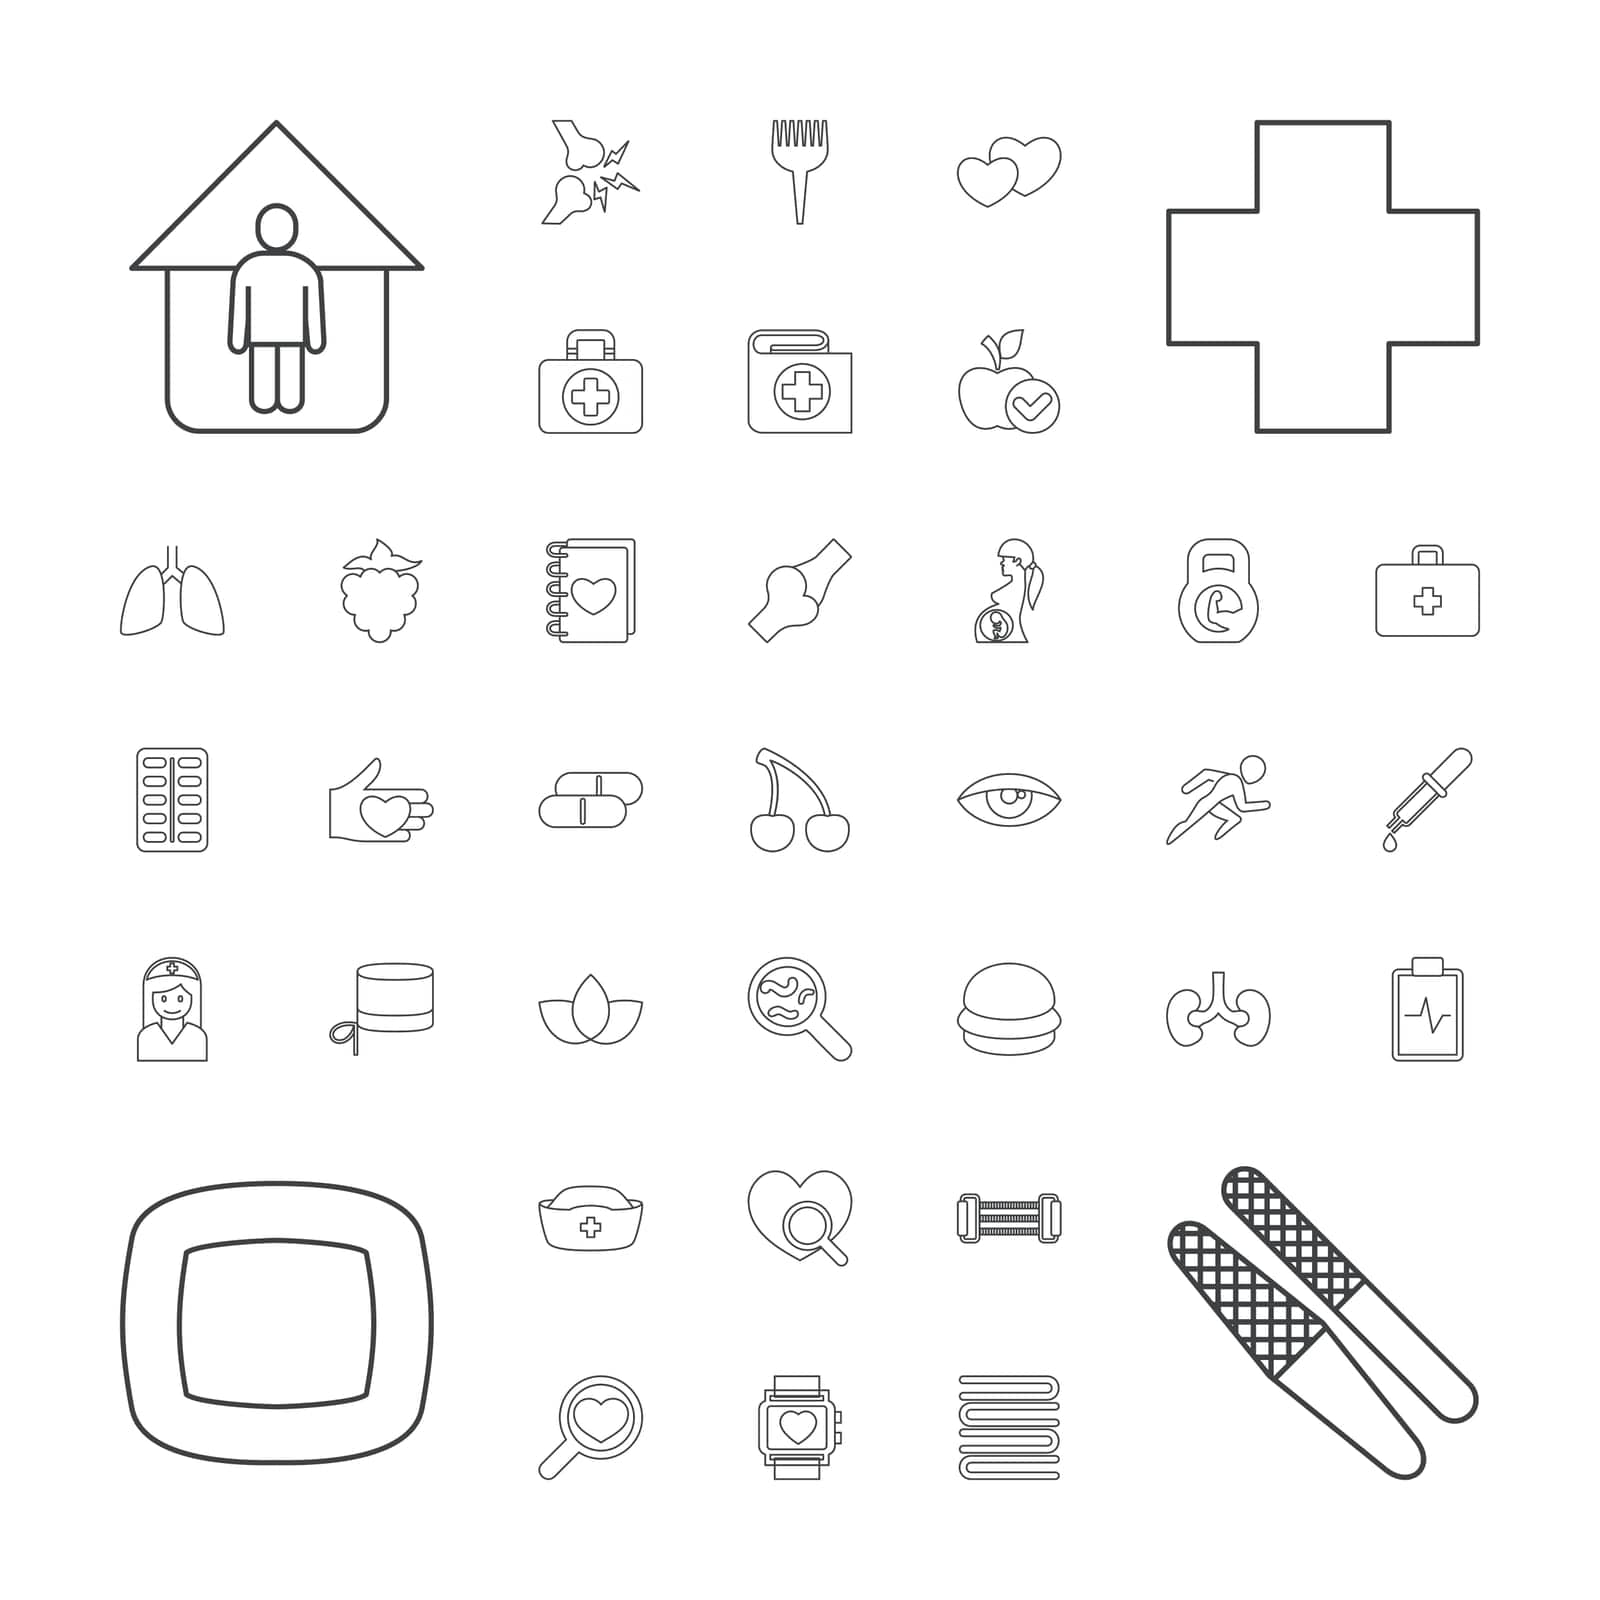 cherry,medical,woman,icon,barbell,pill,leg,bandage,running,apple,kit,nurse,lungs,hat,vector,man,barber,arm,hand,notebook,pregnant,broken,brush,set,or,in,cross,health,bone,mulberry,heart,home,eye,with,pipette,aid,first by ogqcorp